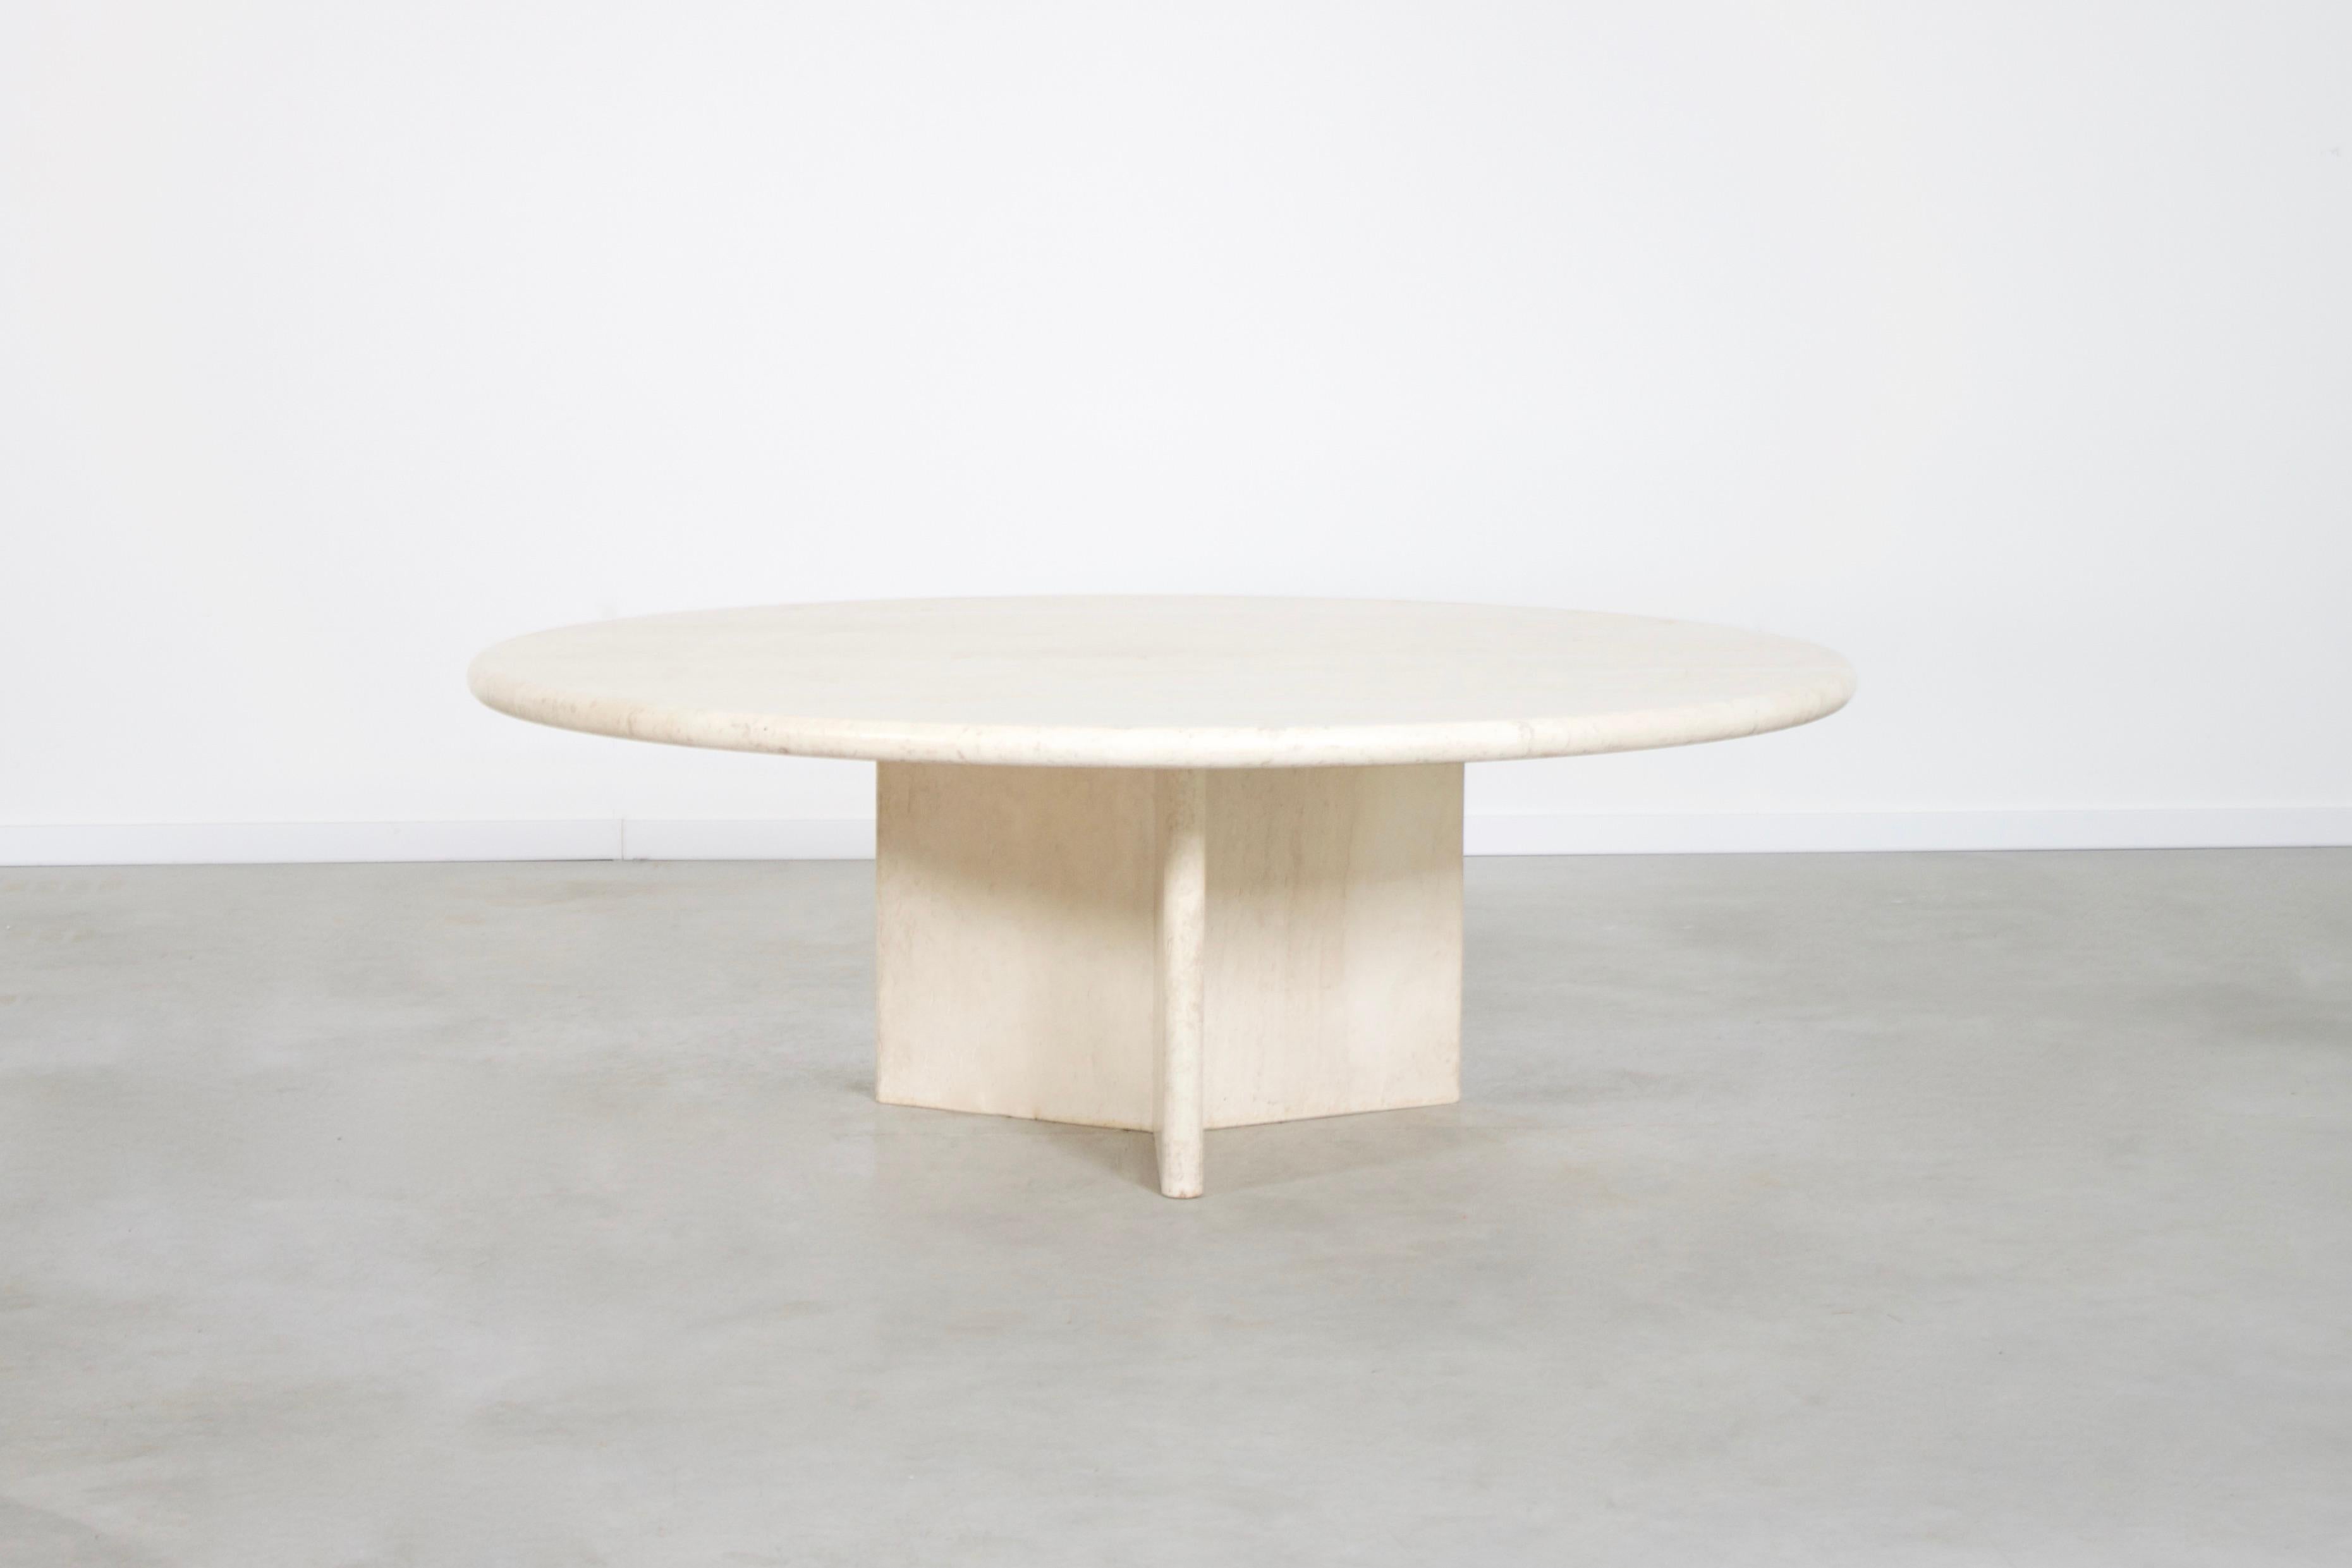 Round travertine coffee table in very good condition. 

The table has a round travertine top. 

The base is formed of three slabs of travertine, which combine into a triangle or star shape. 

The travertine surface is absolutely breathtaking and